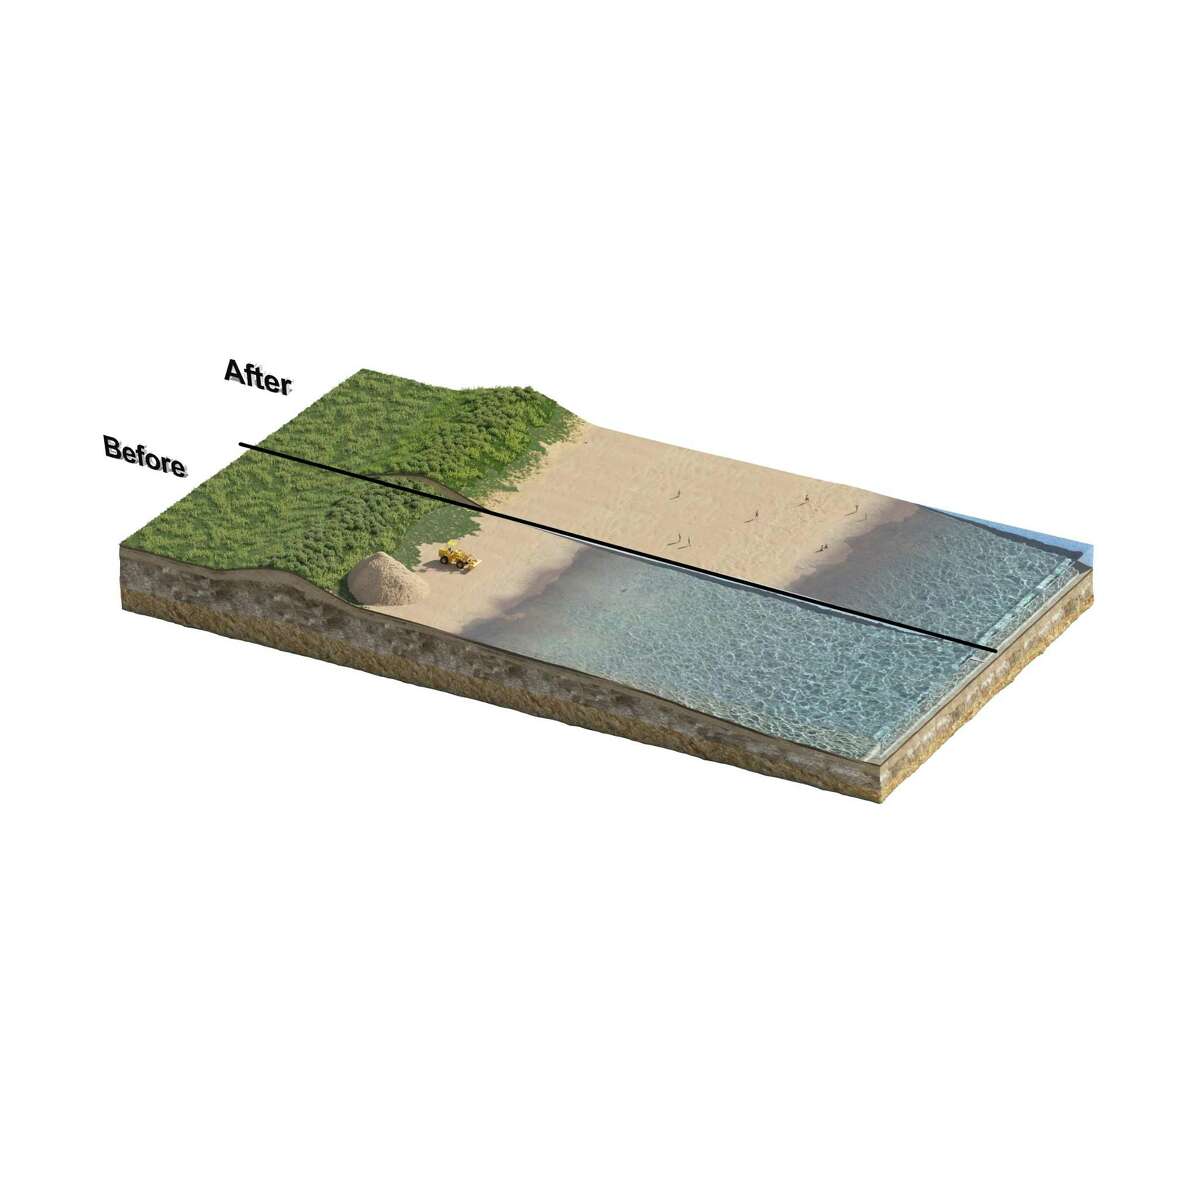 A rendering of beach and dune construction for Bolivar Peninsula and Galveston Island, as part of the coastal barrier proposal for southeast Texas. The dune features include a 14-foot landward dune and a 12-foot gulfward dune with a 250 foot wide beach system on the water side.